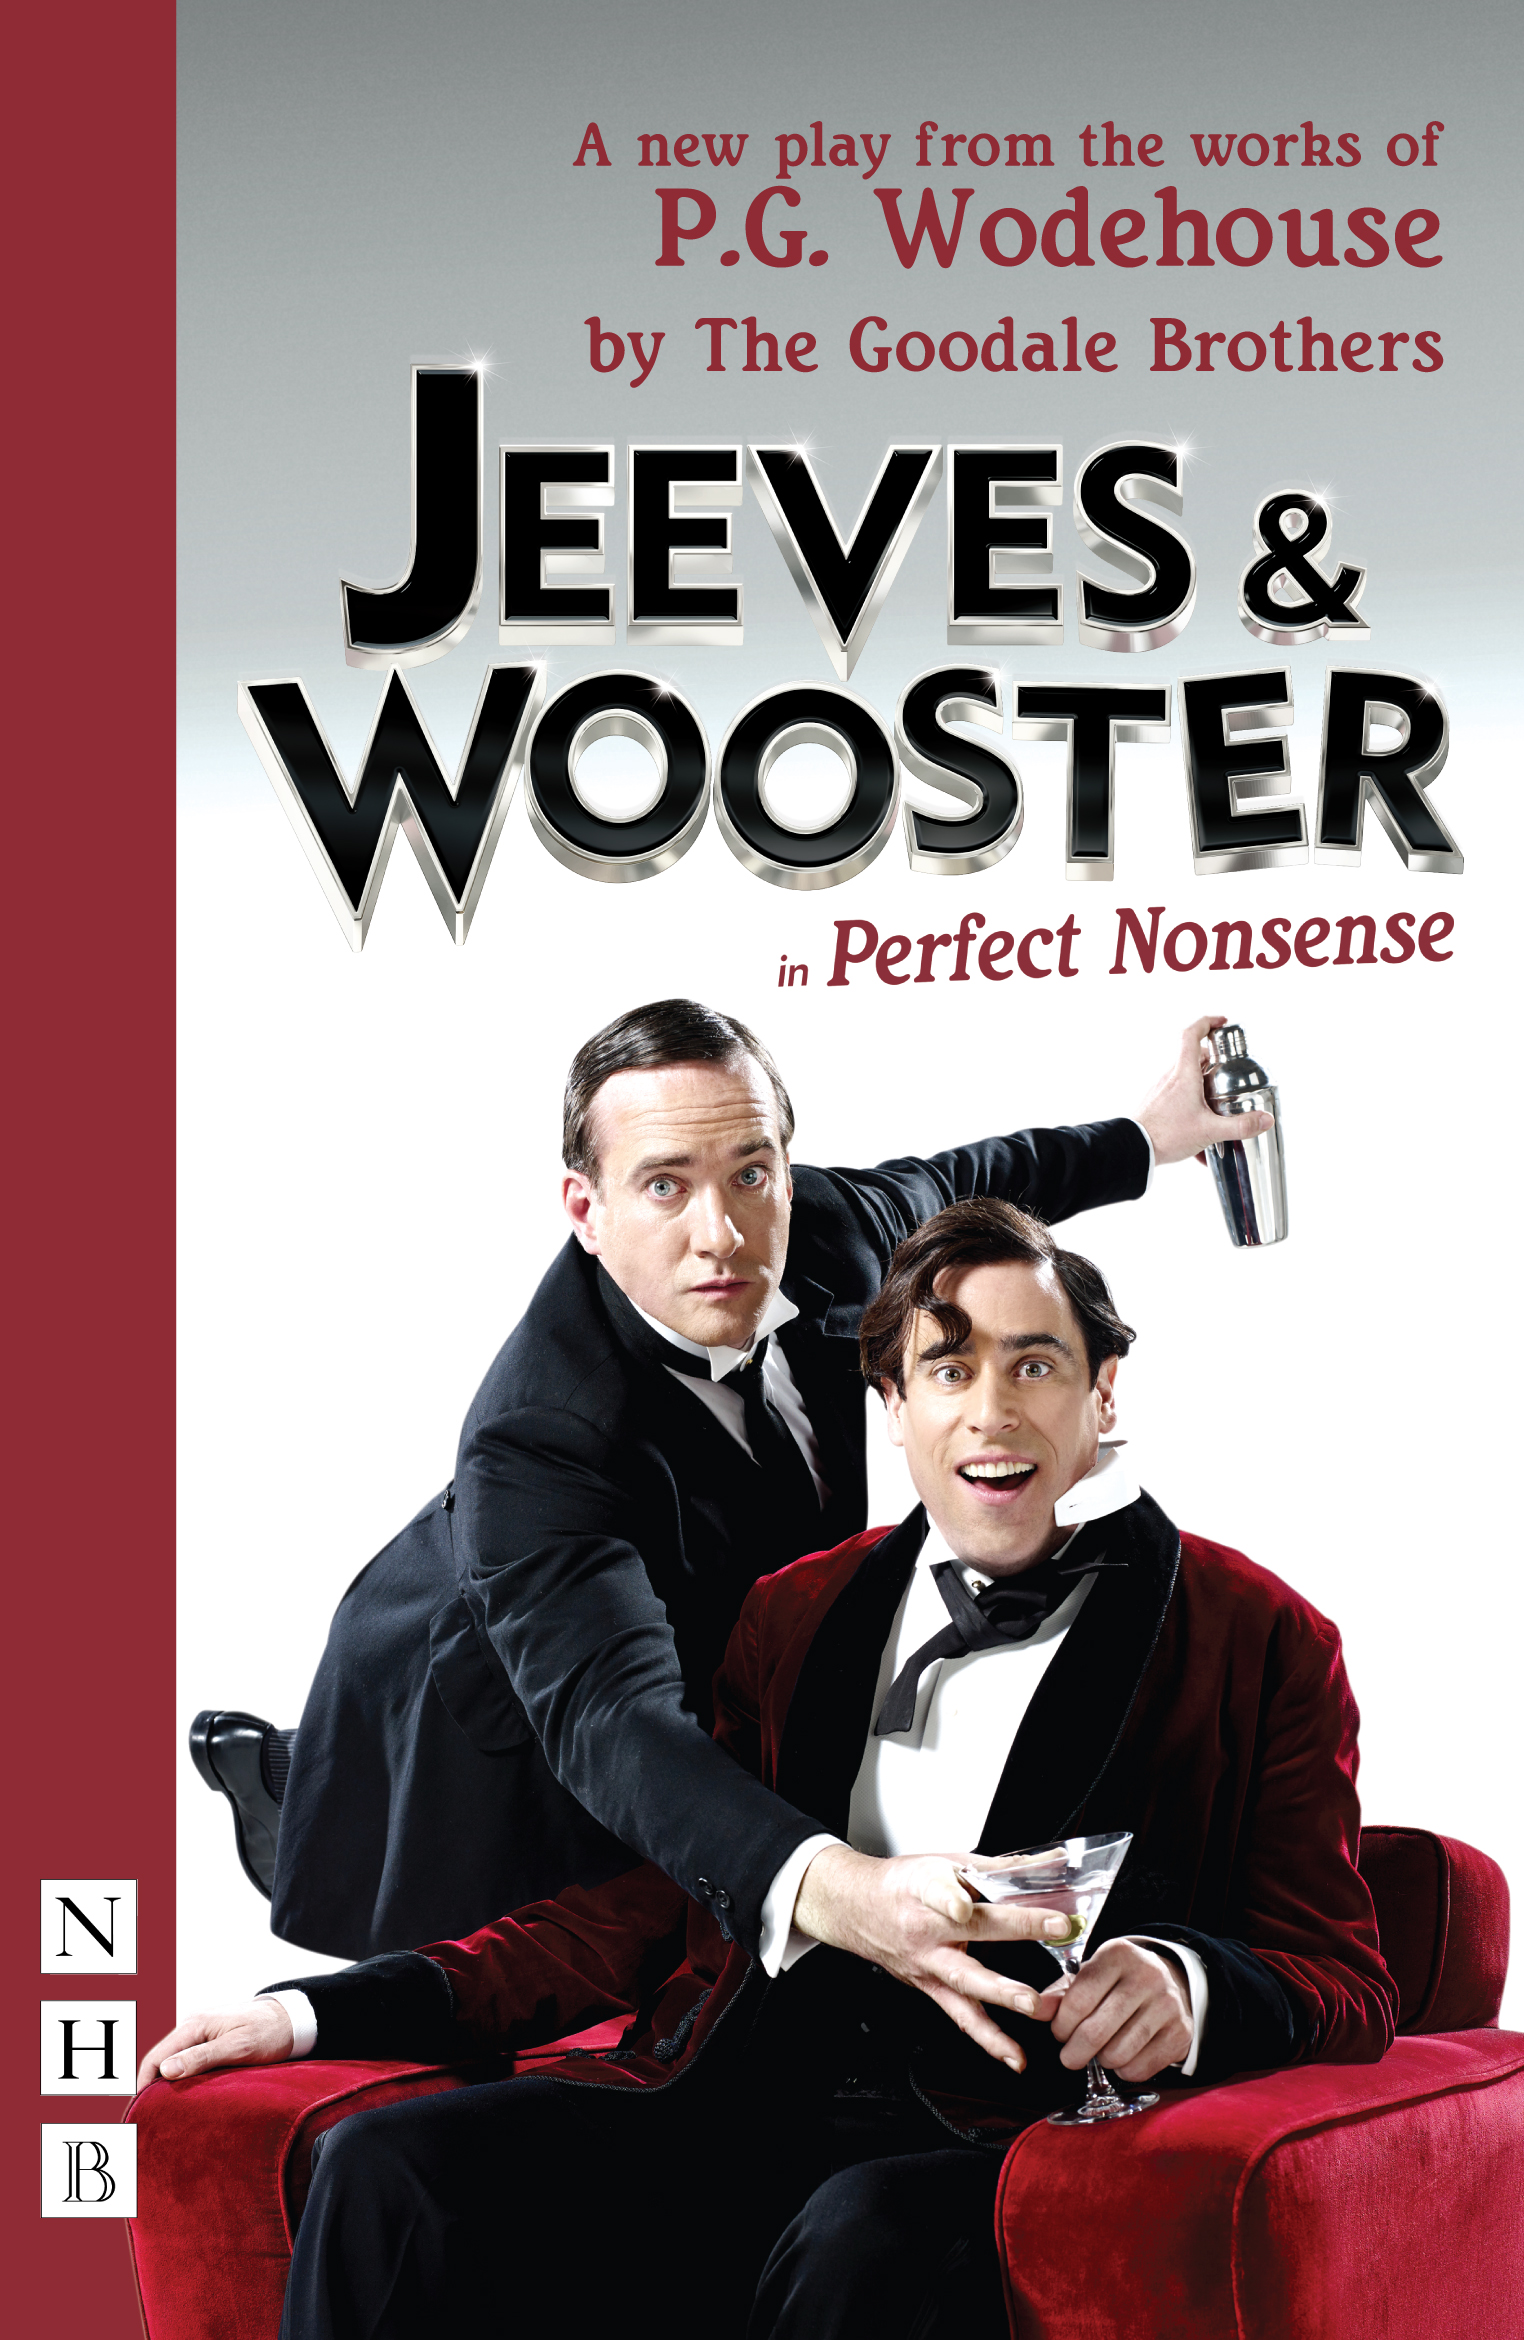 Nick Hern Books - Images for News items - Jeeves & Wooster